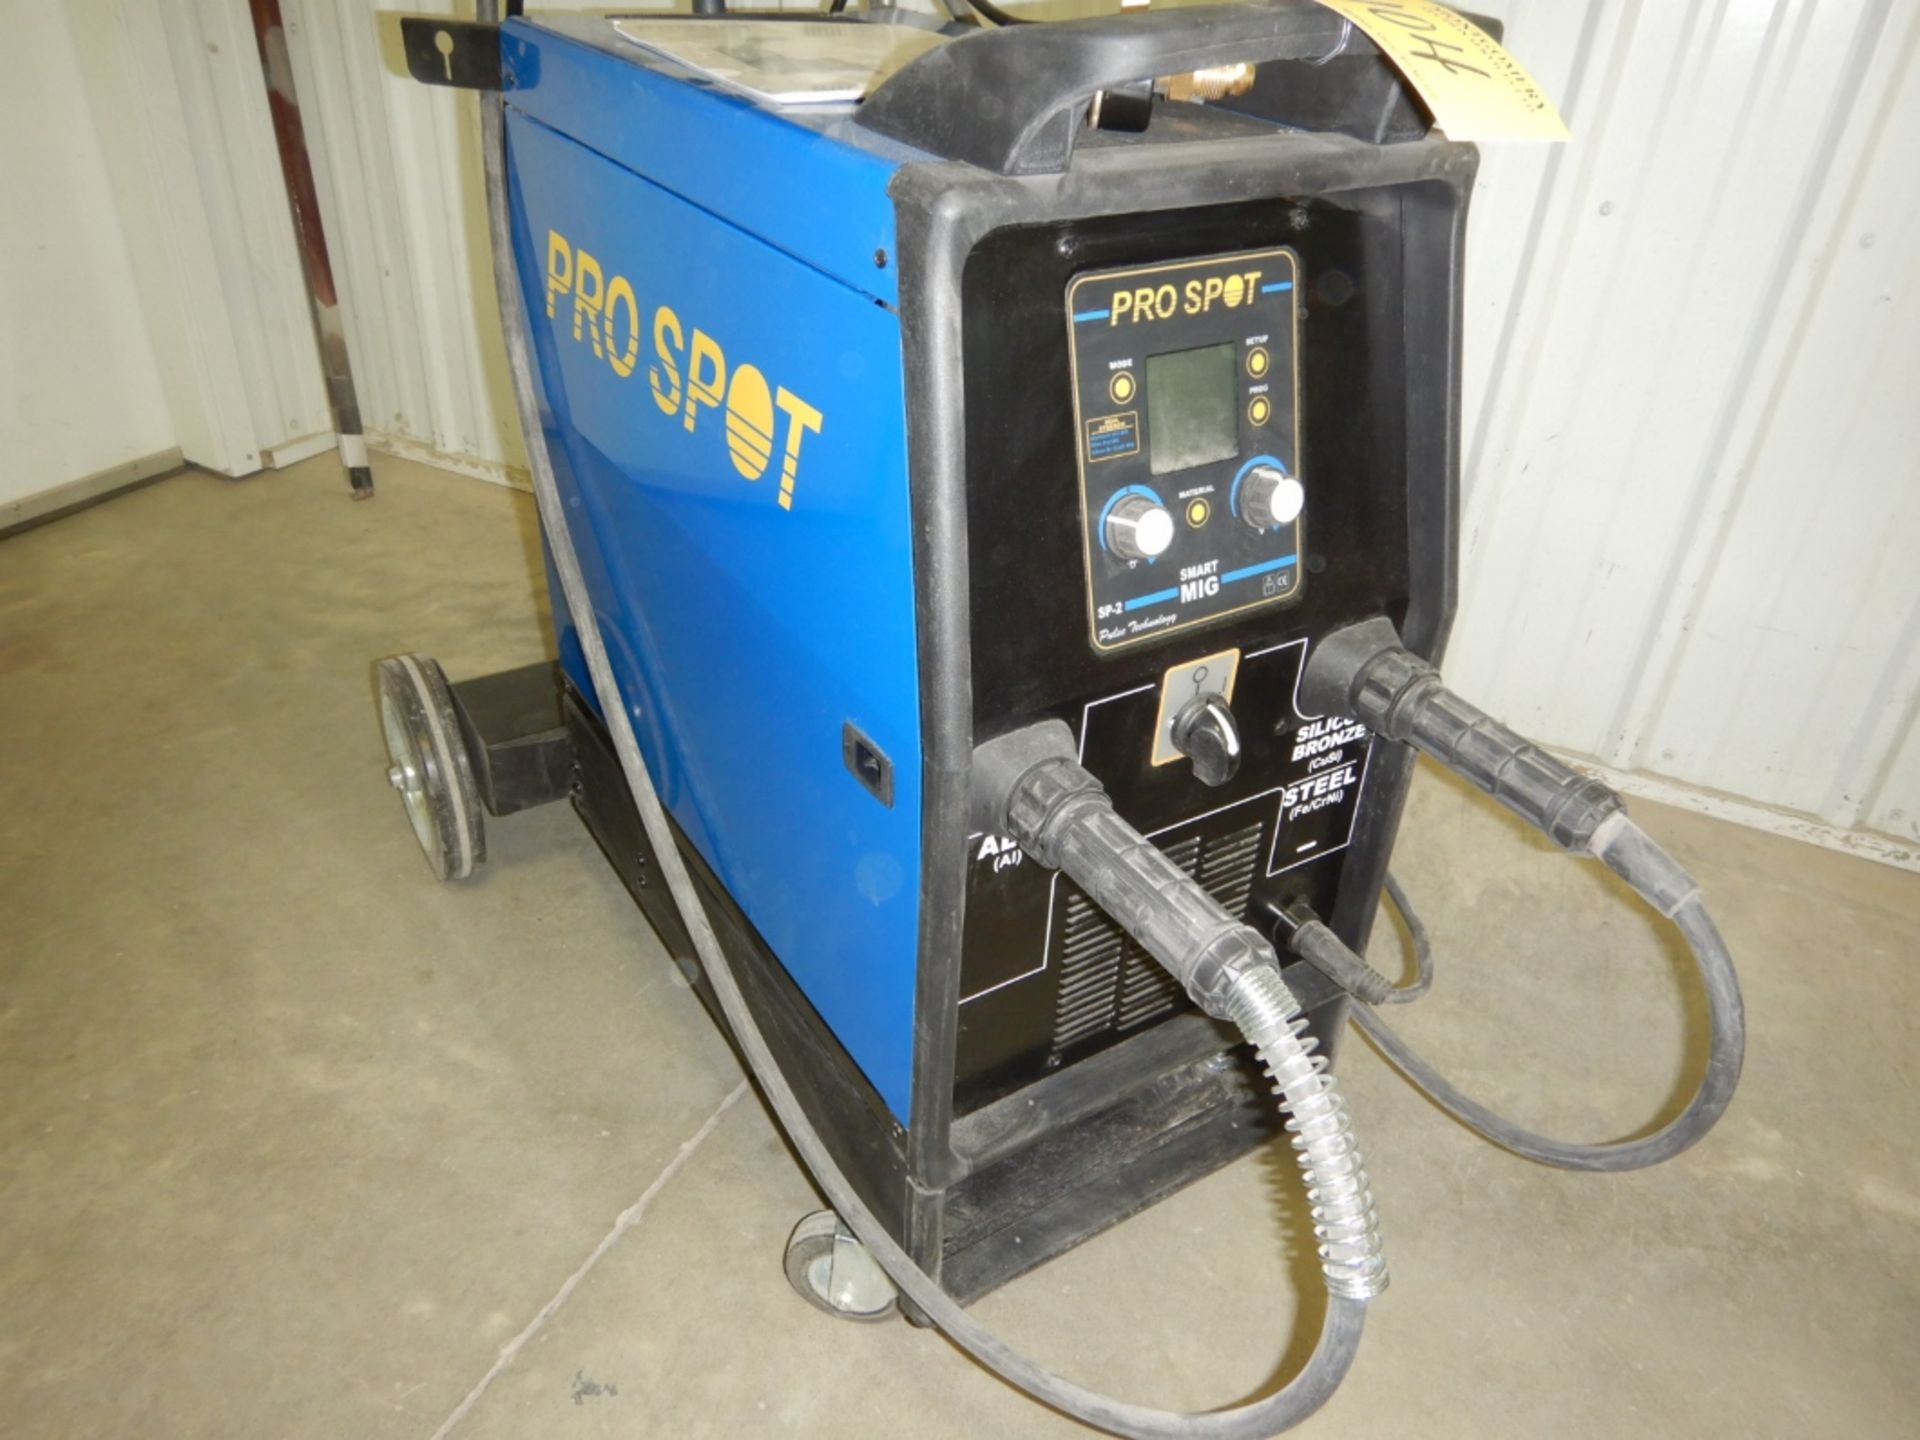 2020 PRO SPOT SP2 SMART MIG SILICON BRONZE AND ALUMINUM WELDER, S/N P19700500 - Image 3 of 10